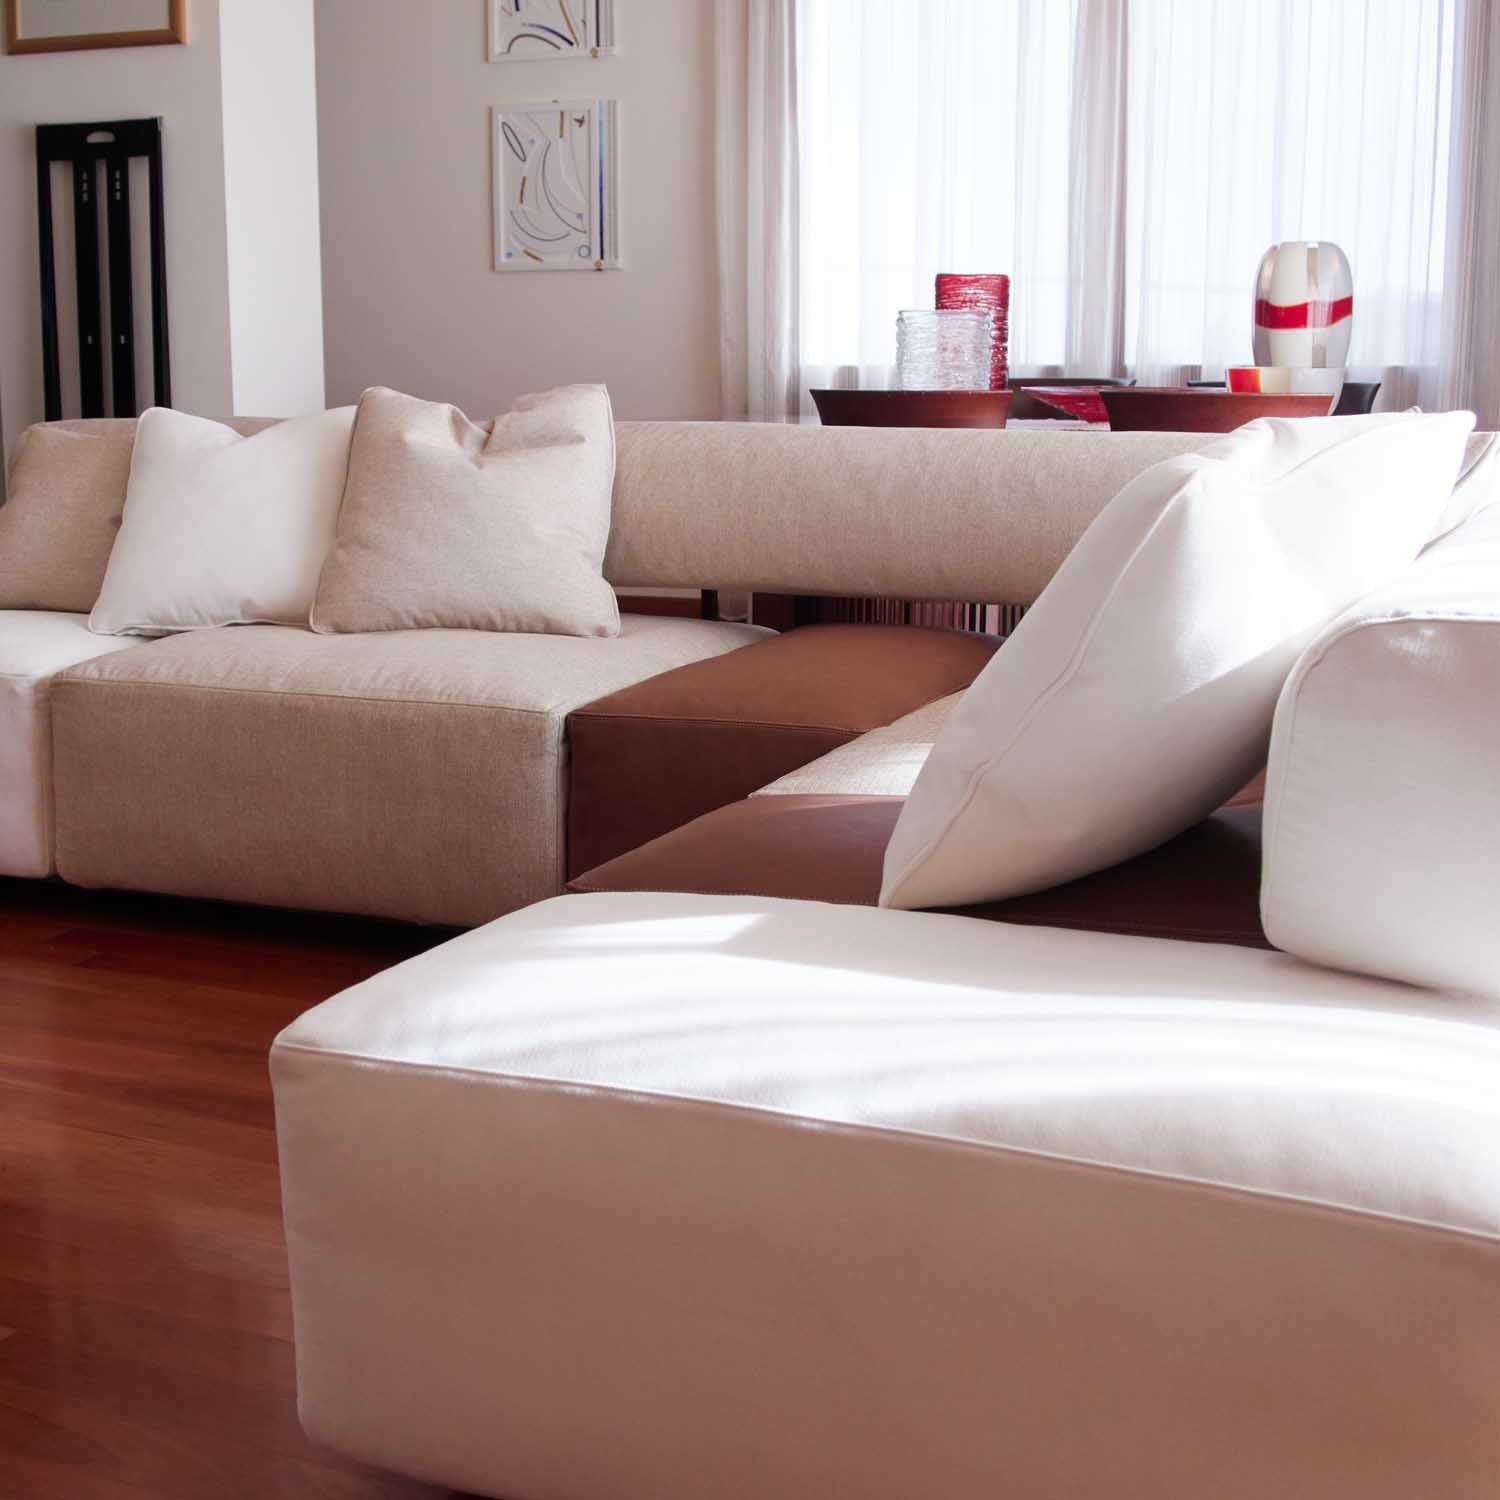 Monochromatic or contrasting upholstery options.